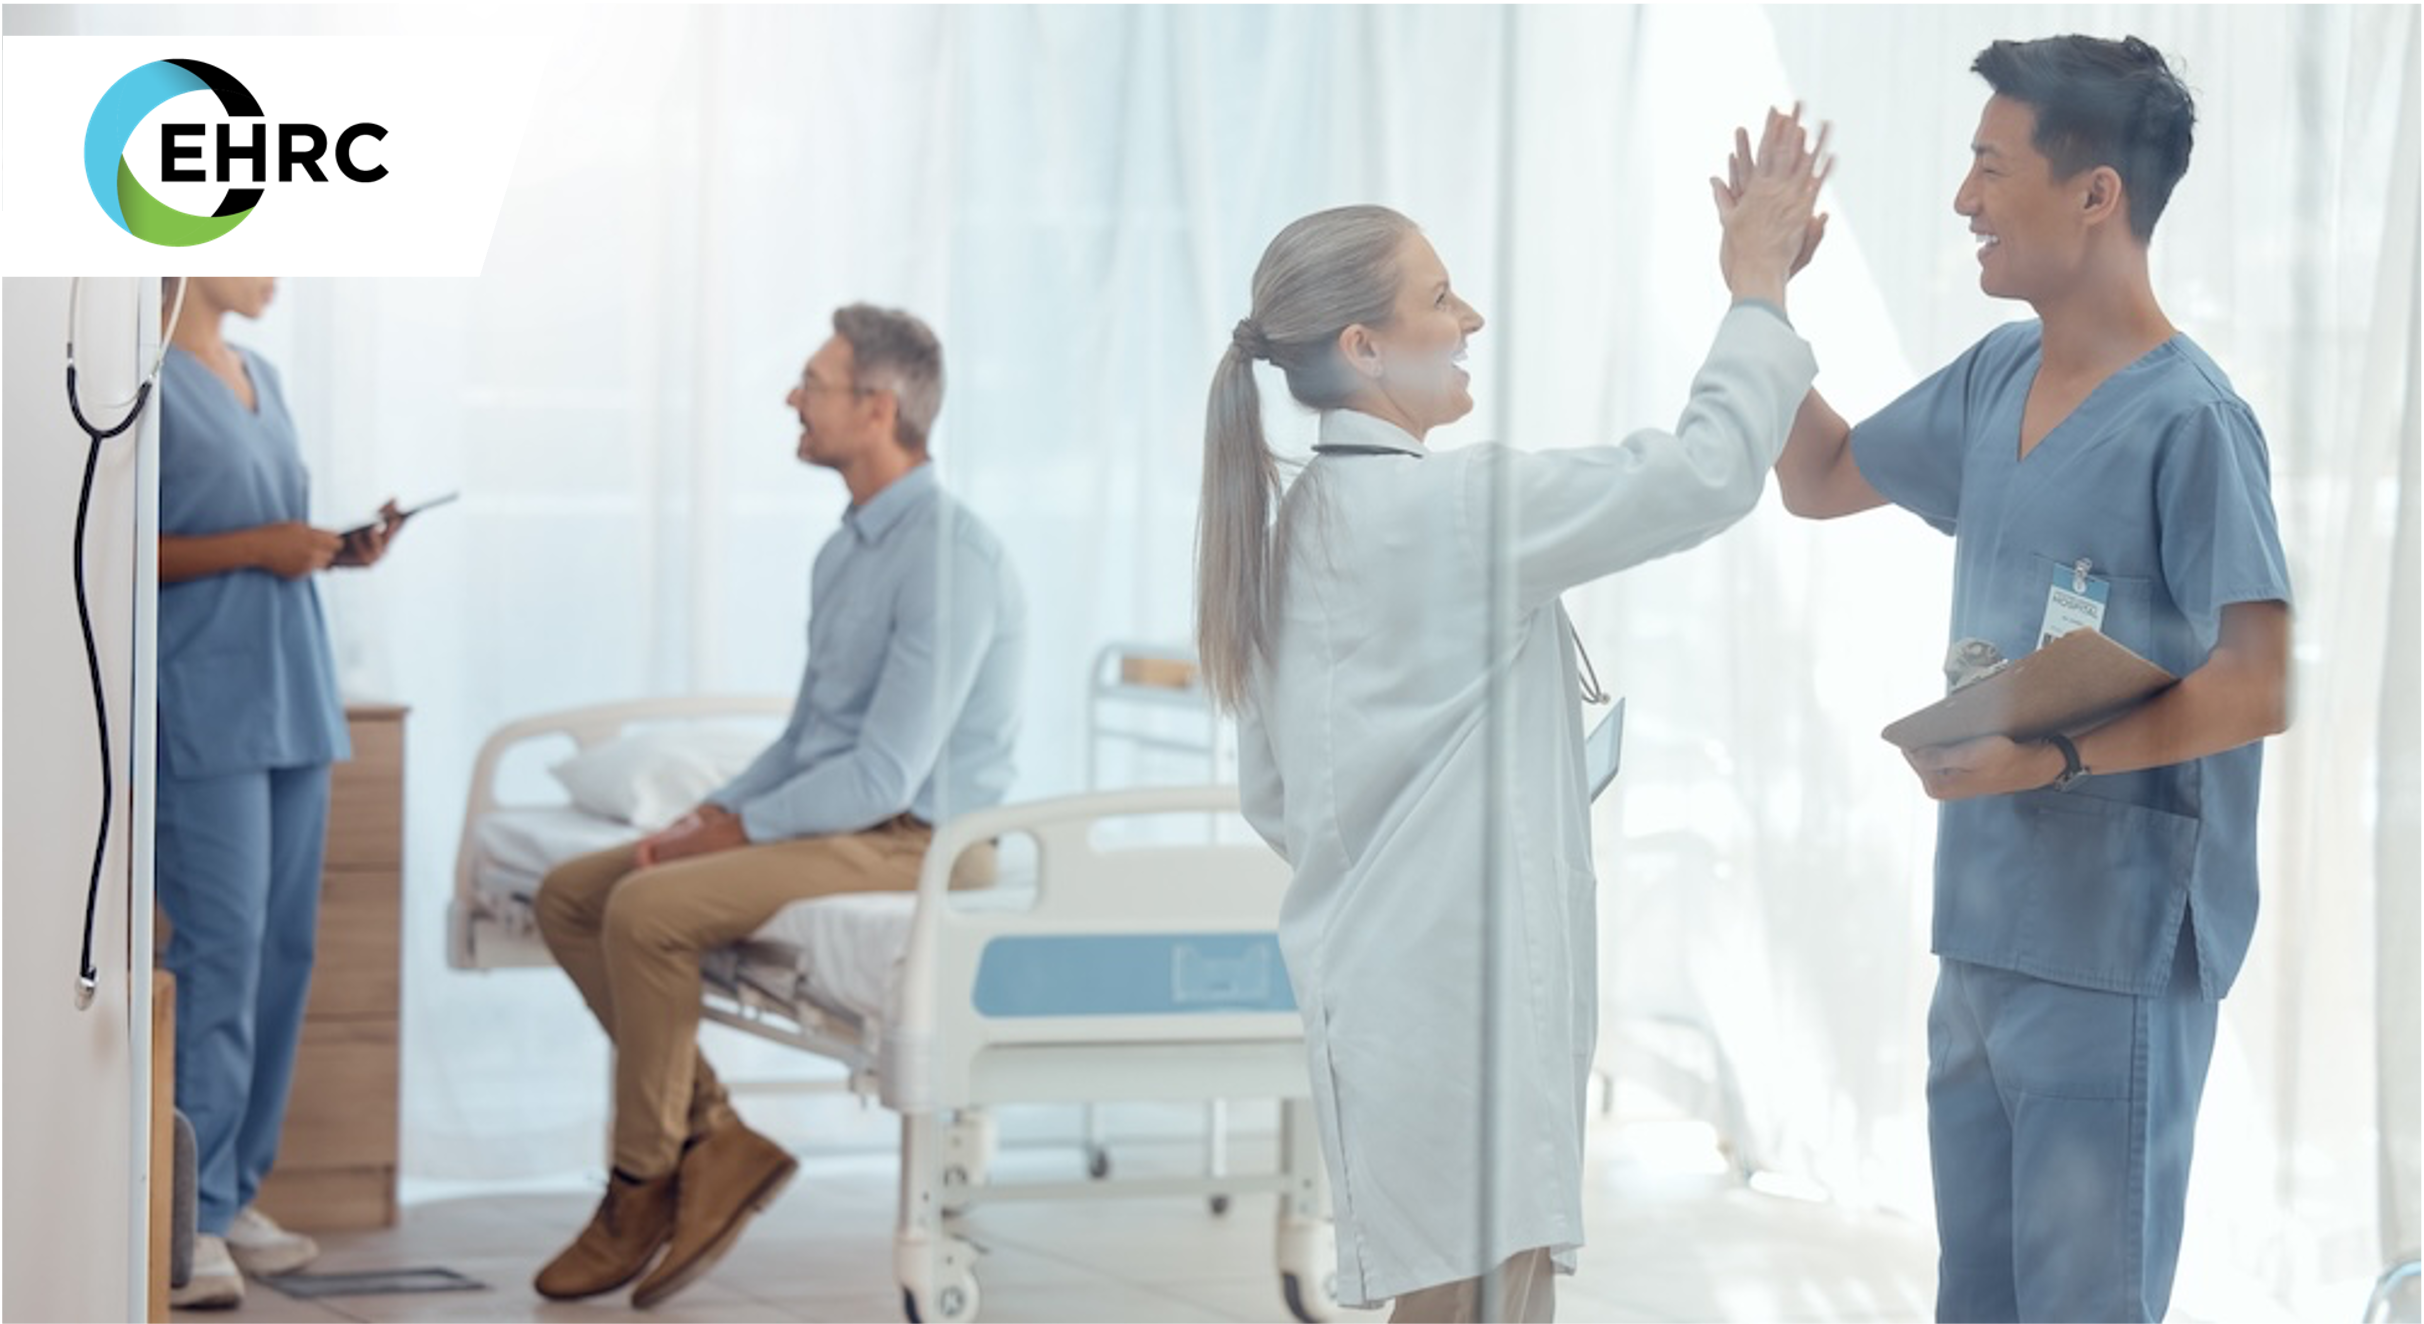 The Healthcare Transformation: Putting Patients at the Center with Seamless Experiences